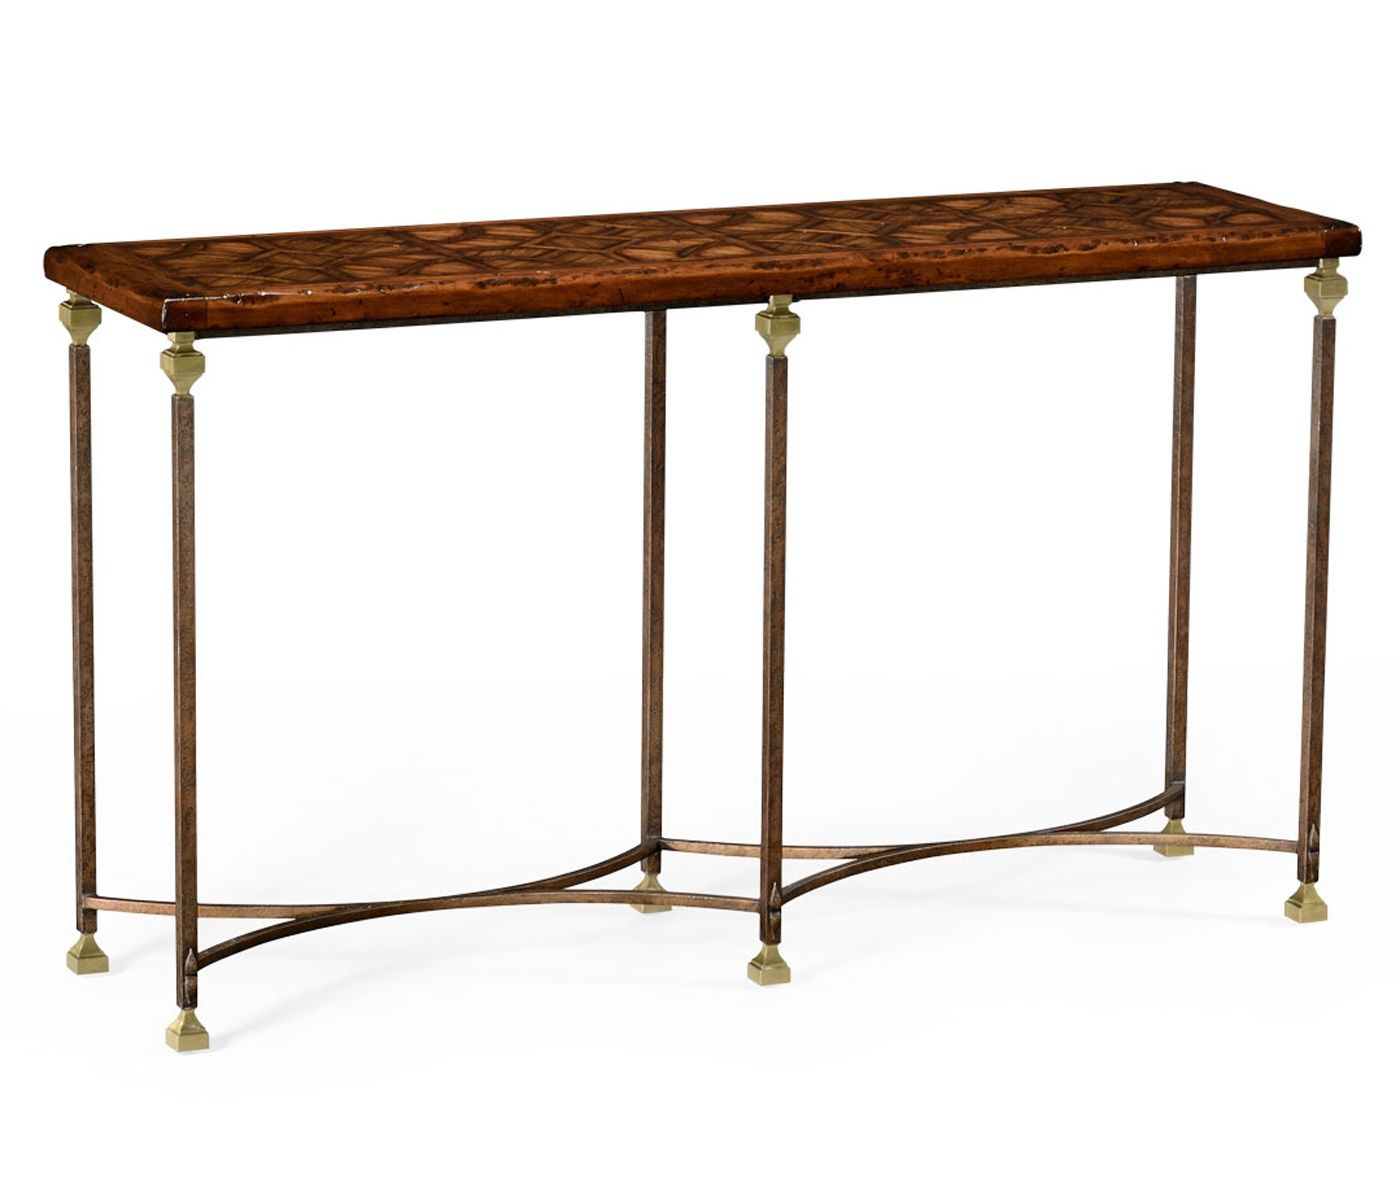 Narrow Walnut Iron Console Table | Swanky Interiors Pertaining To Round Iron Console Tables (View 17 of 20)